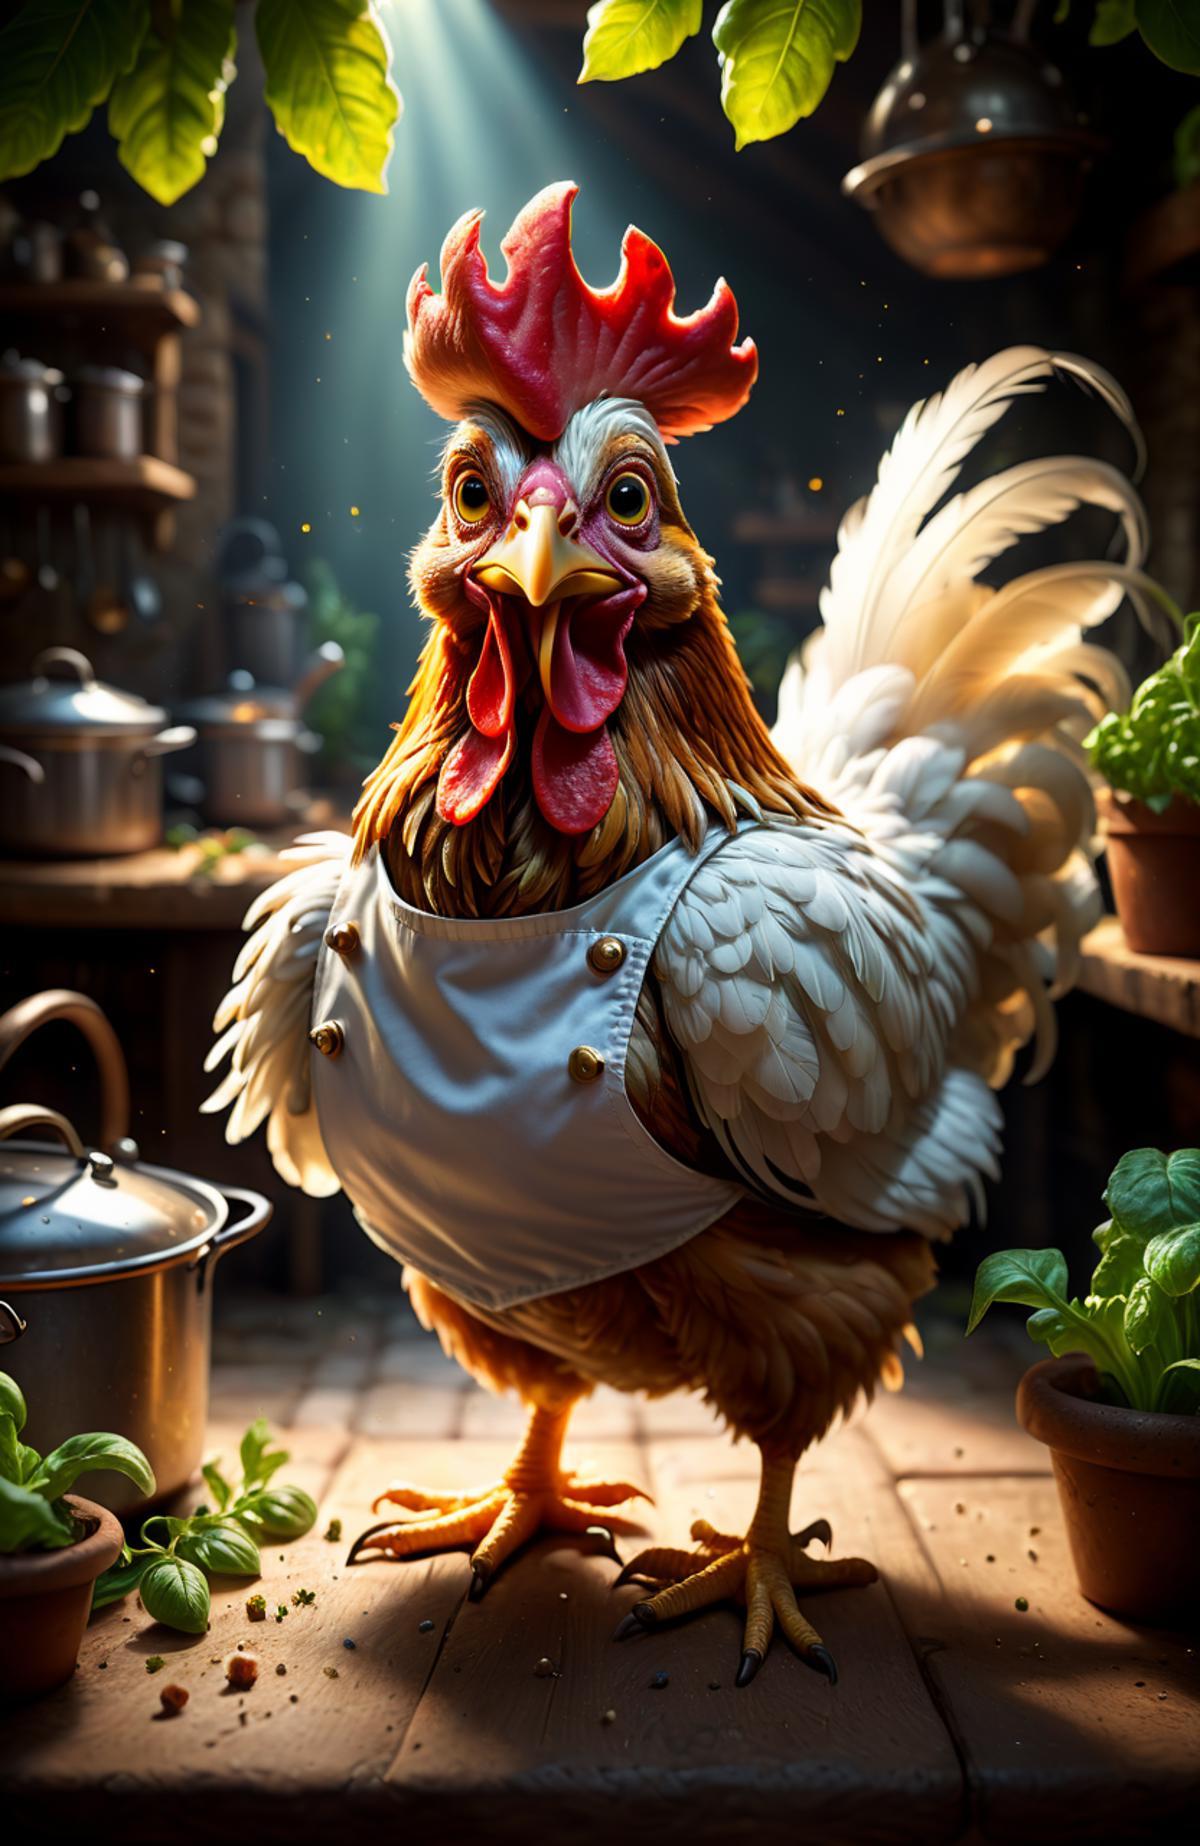 Illustration of a rooster with a chef's outfit, standing in a kitchen surrounded by pots, pans, and herbs.